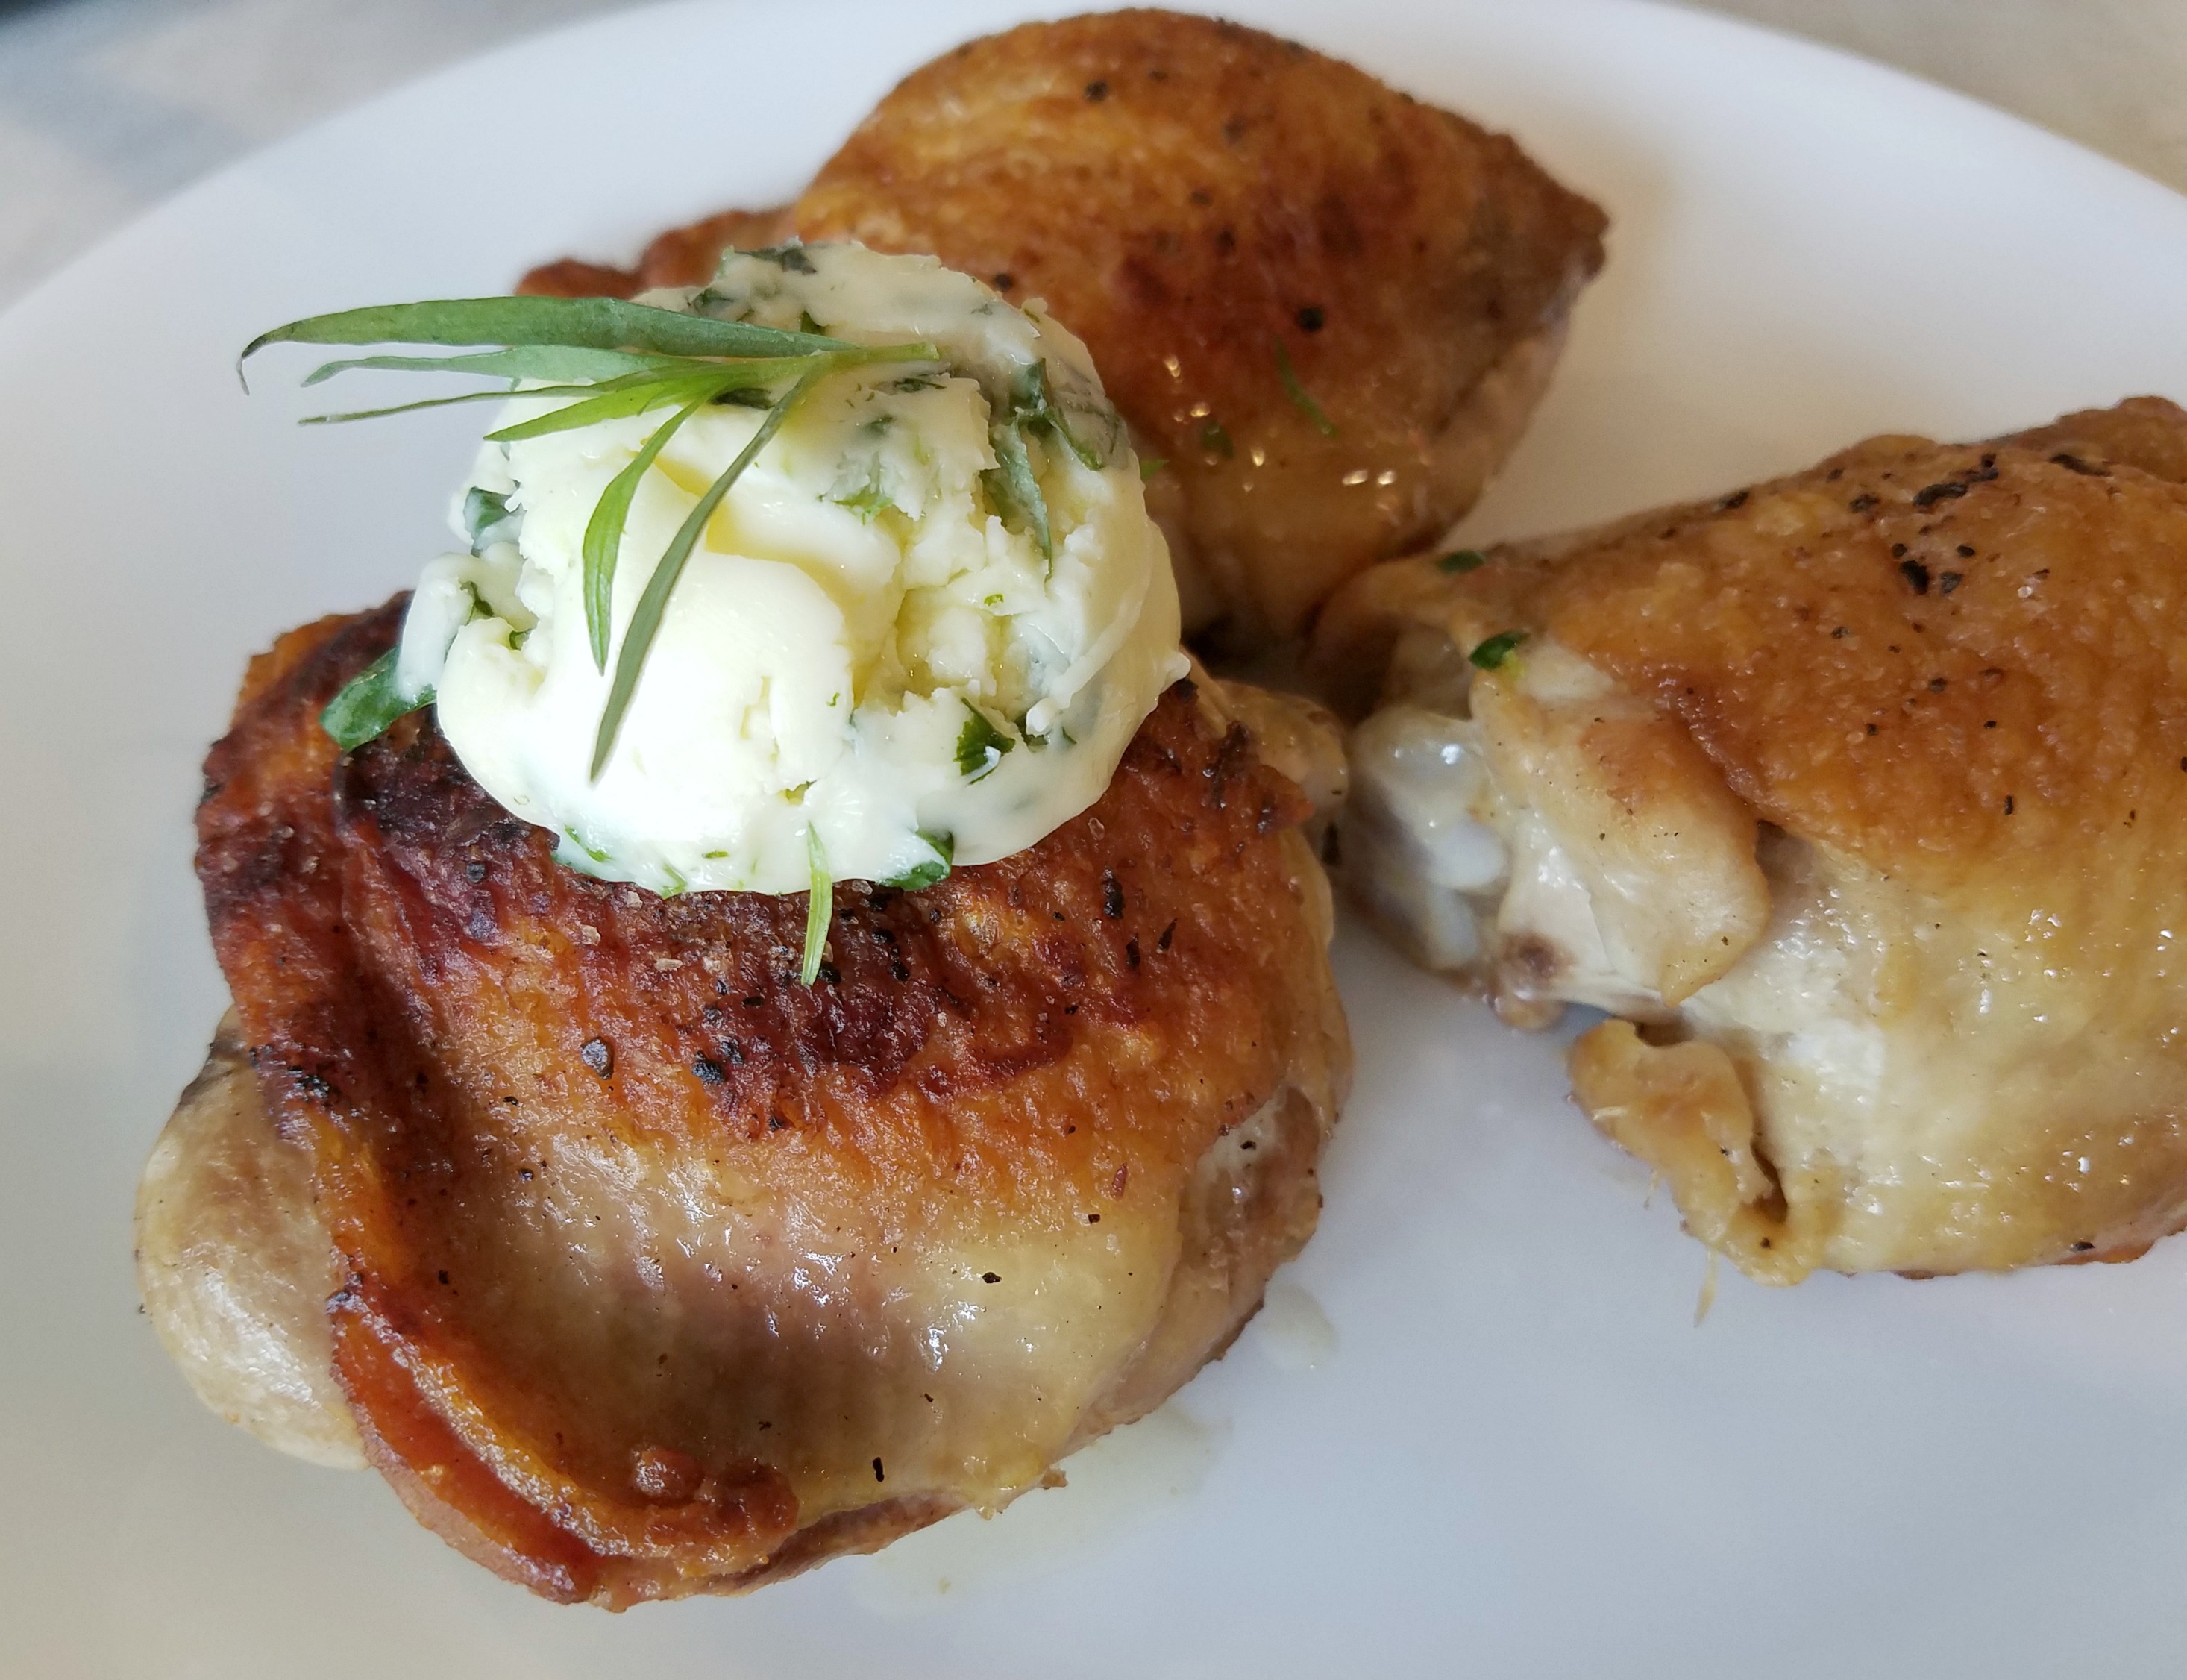 Grilled Chicken with Tarragon Butter